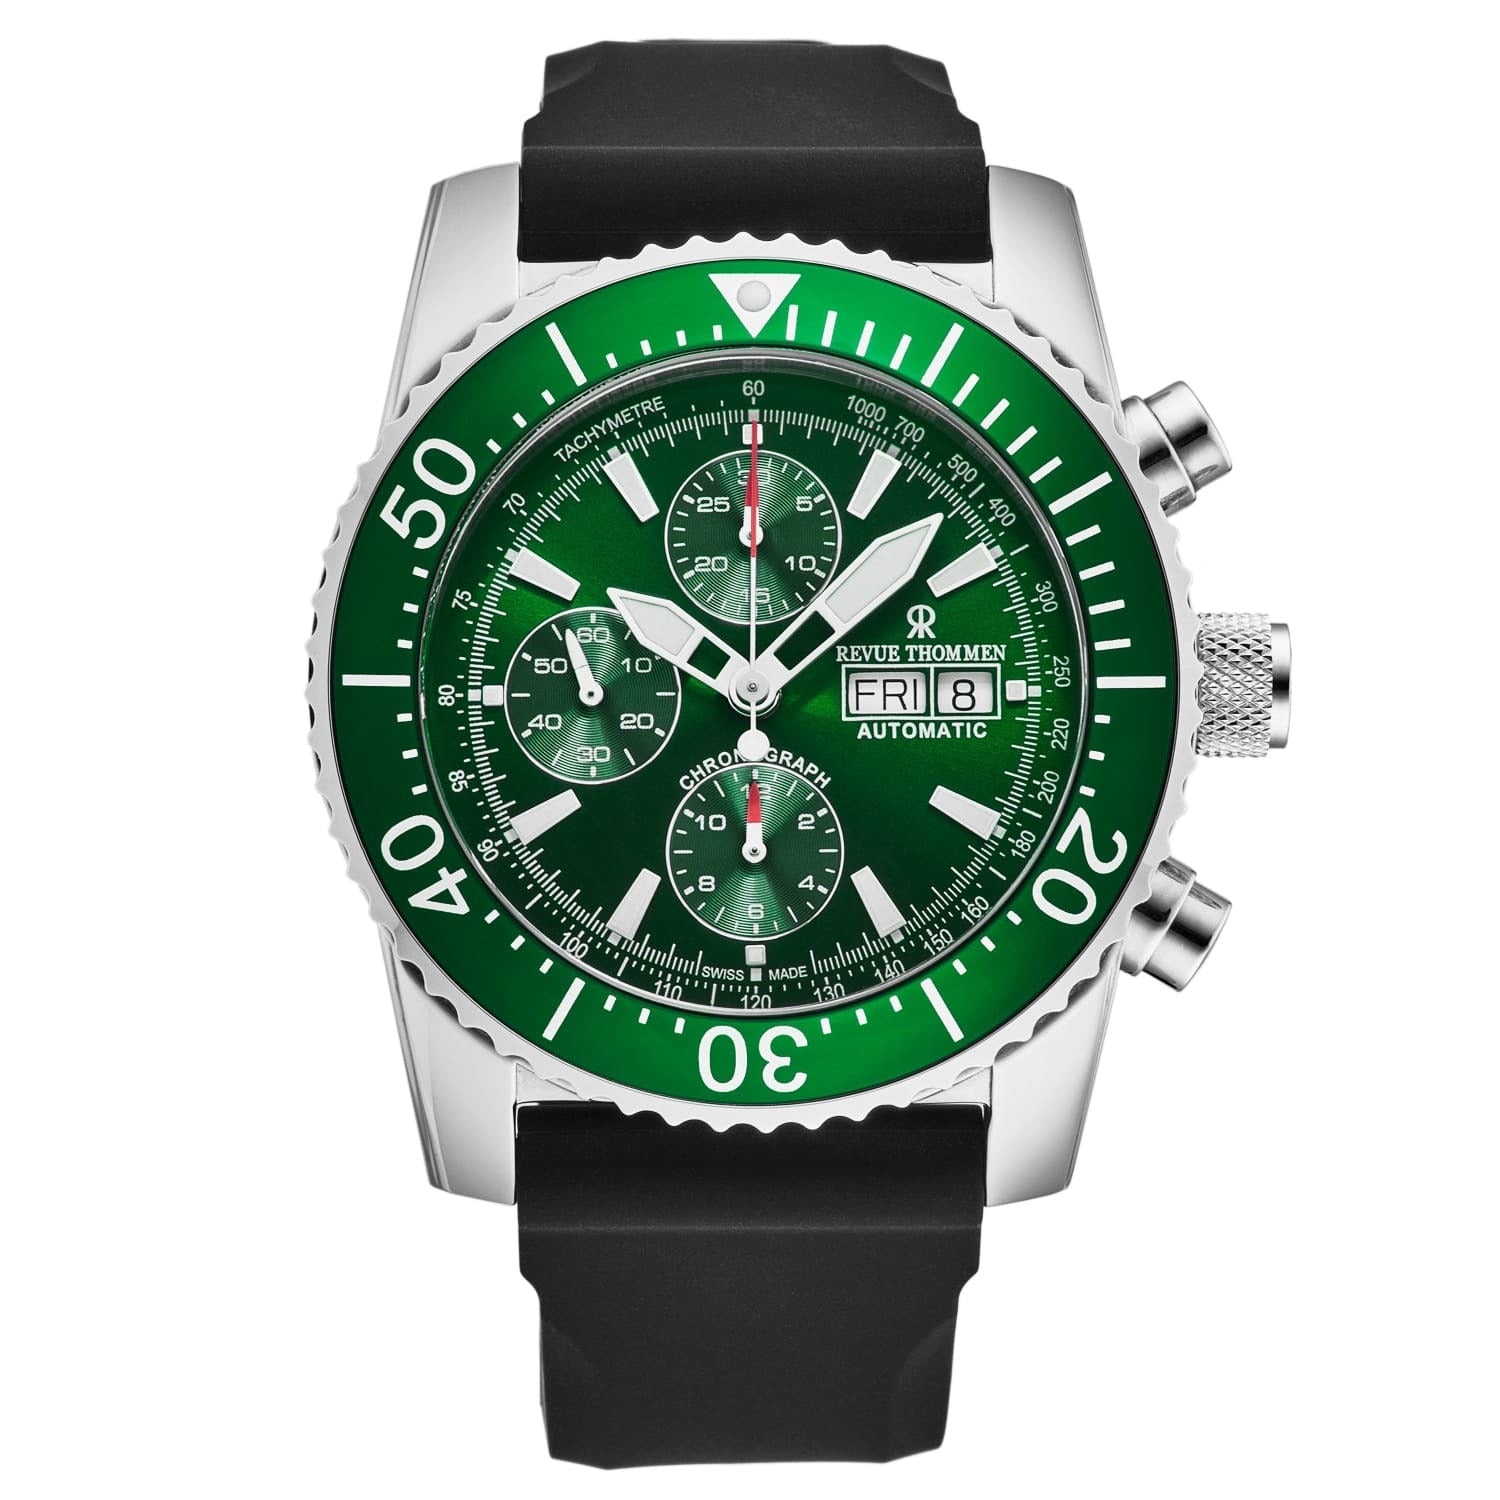 A Revue Thommen Men's 17030.6532 'Divers' Green Dial Day-Date Chronograph Rubber Strap Automatic Watch with green dials on a white background.